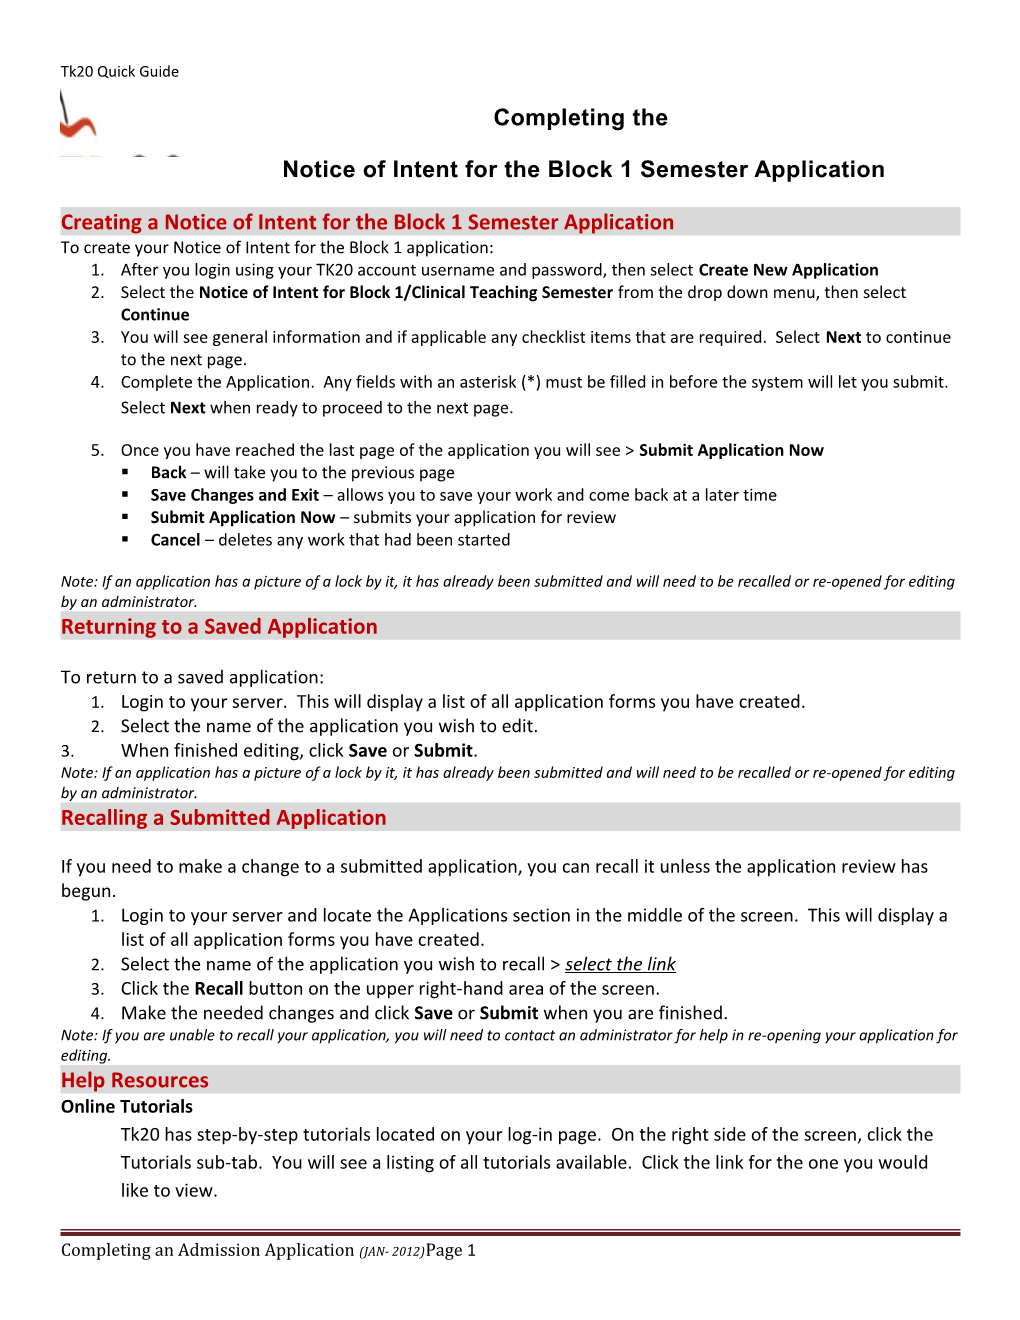 Notice of Intent for the Block 1 Semesterapplication